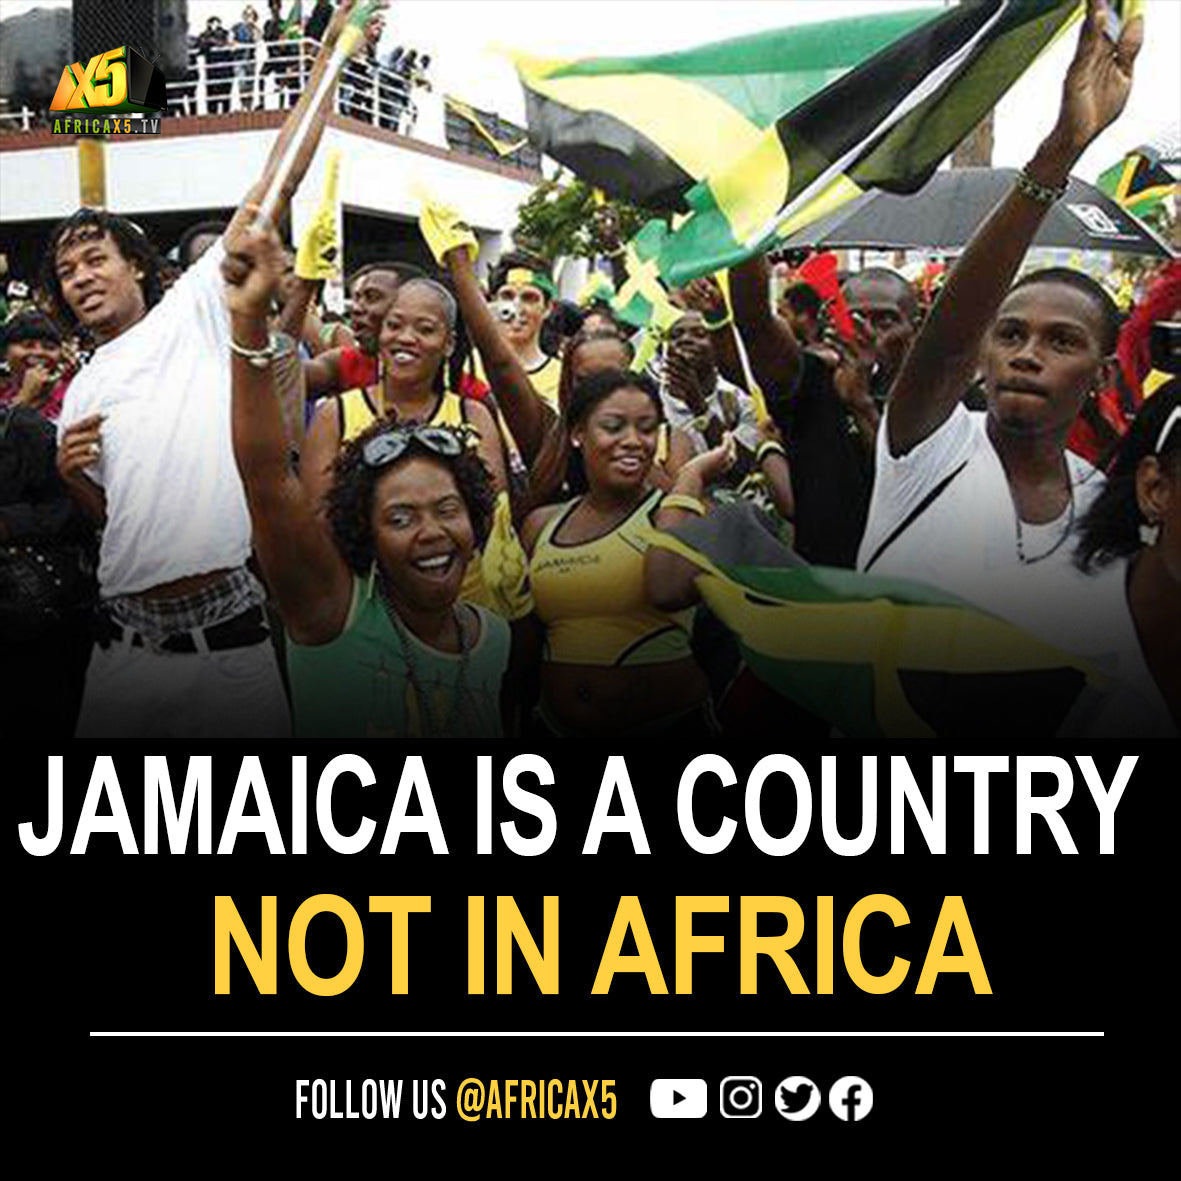 Most people don't know that Jamaica is not geographically and politically an African country